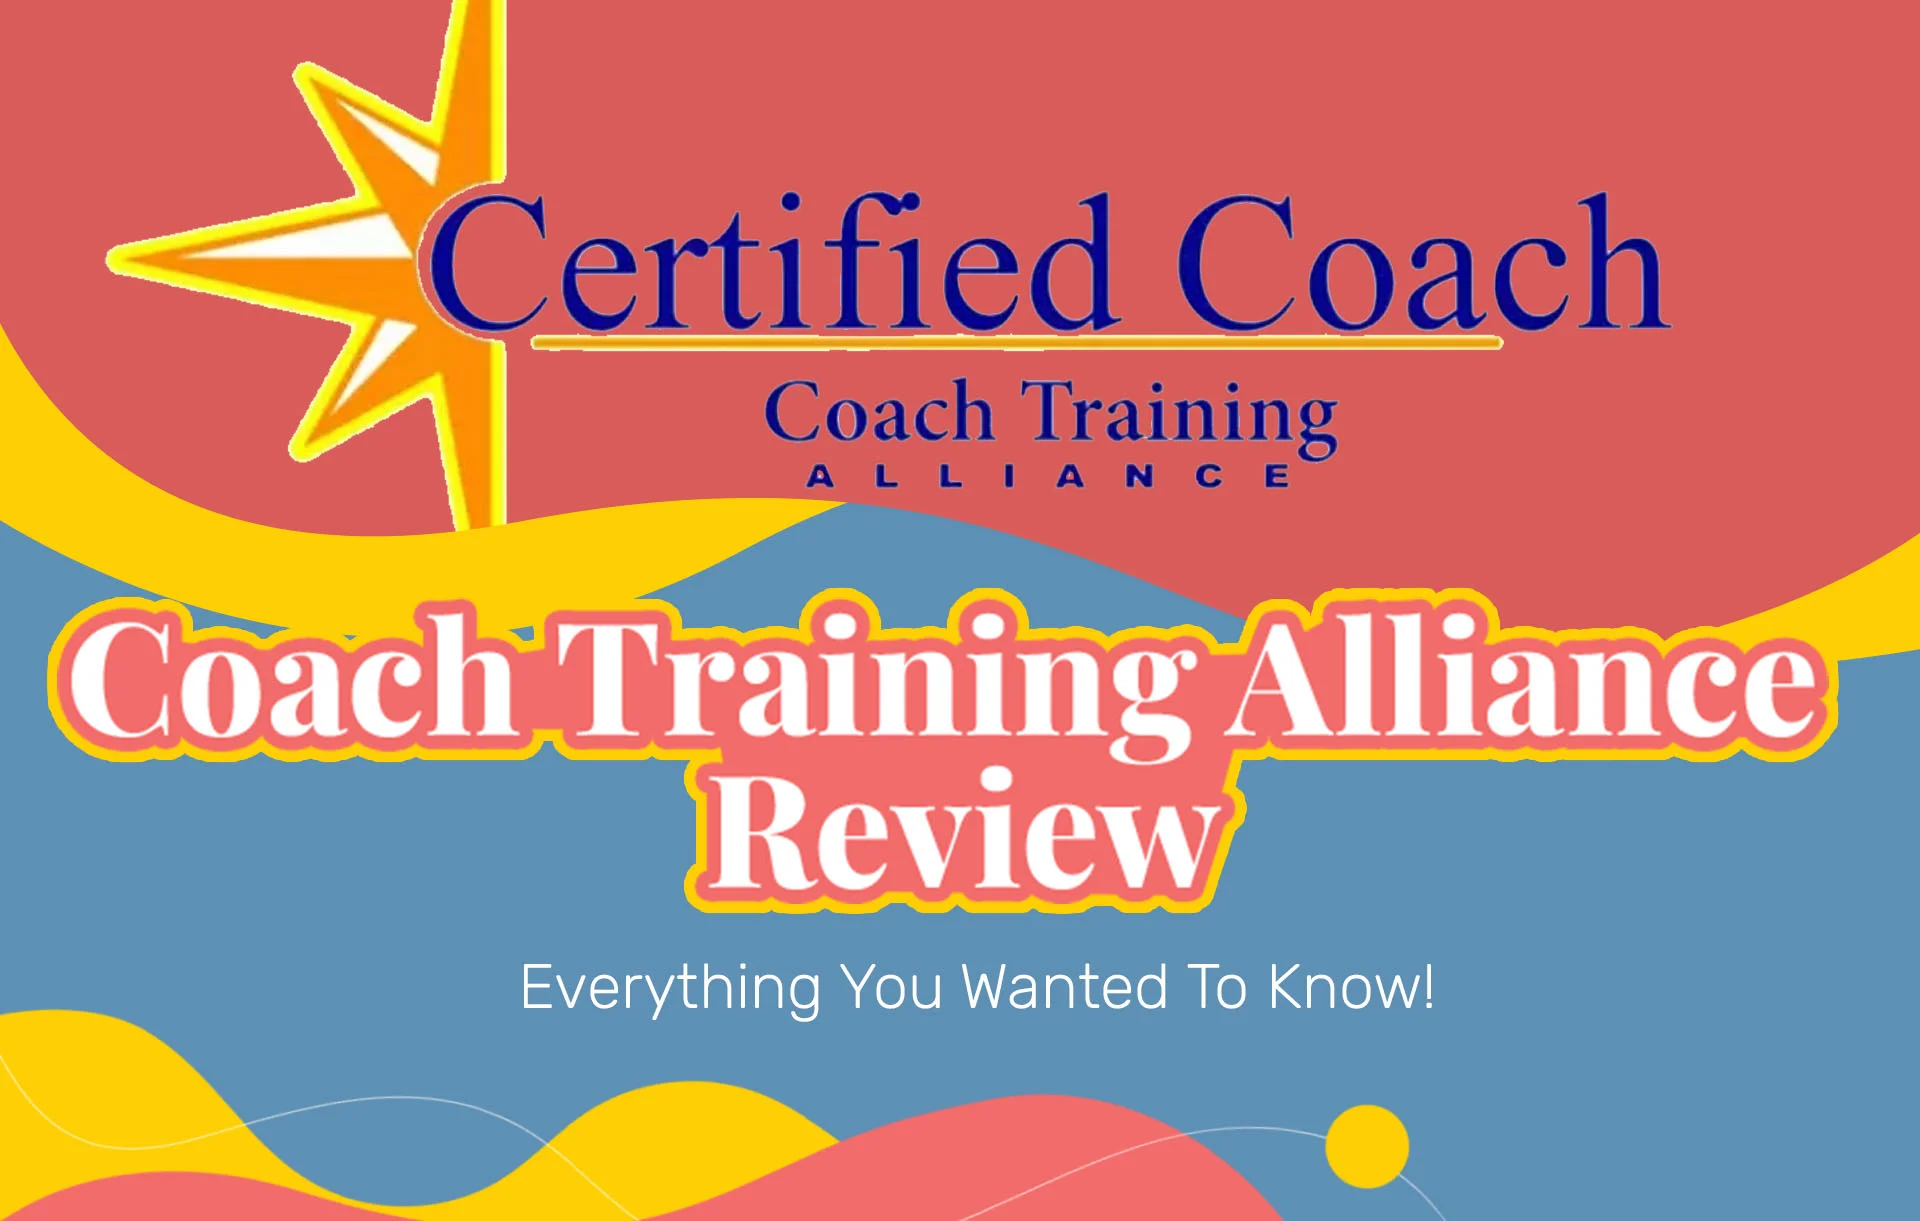 Coach Training Alliance Reviews: Everything You Wanted To Know!